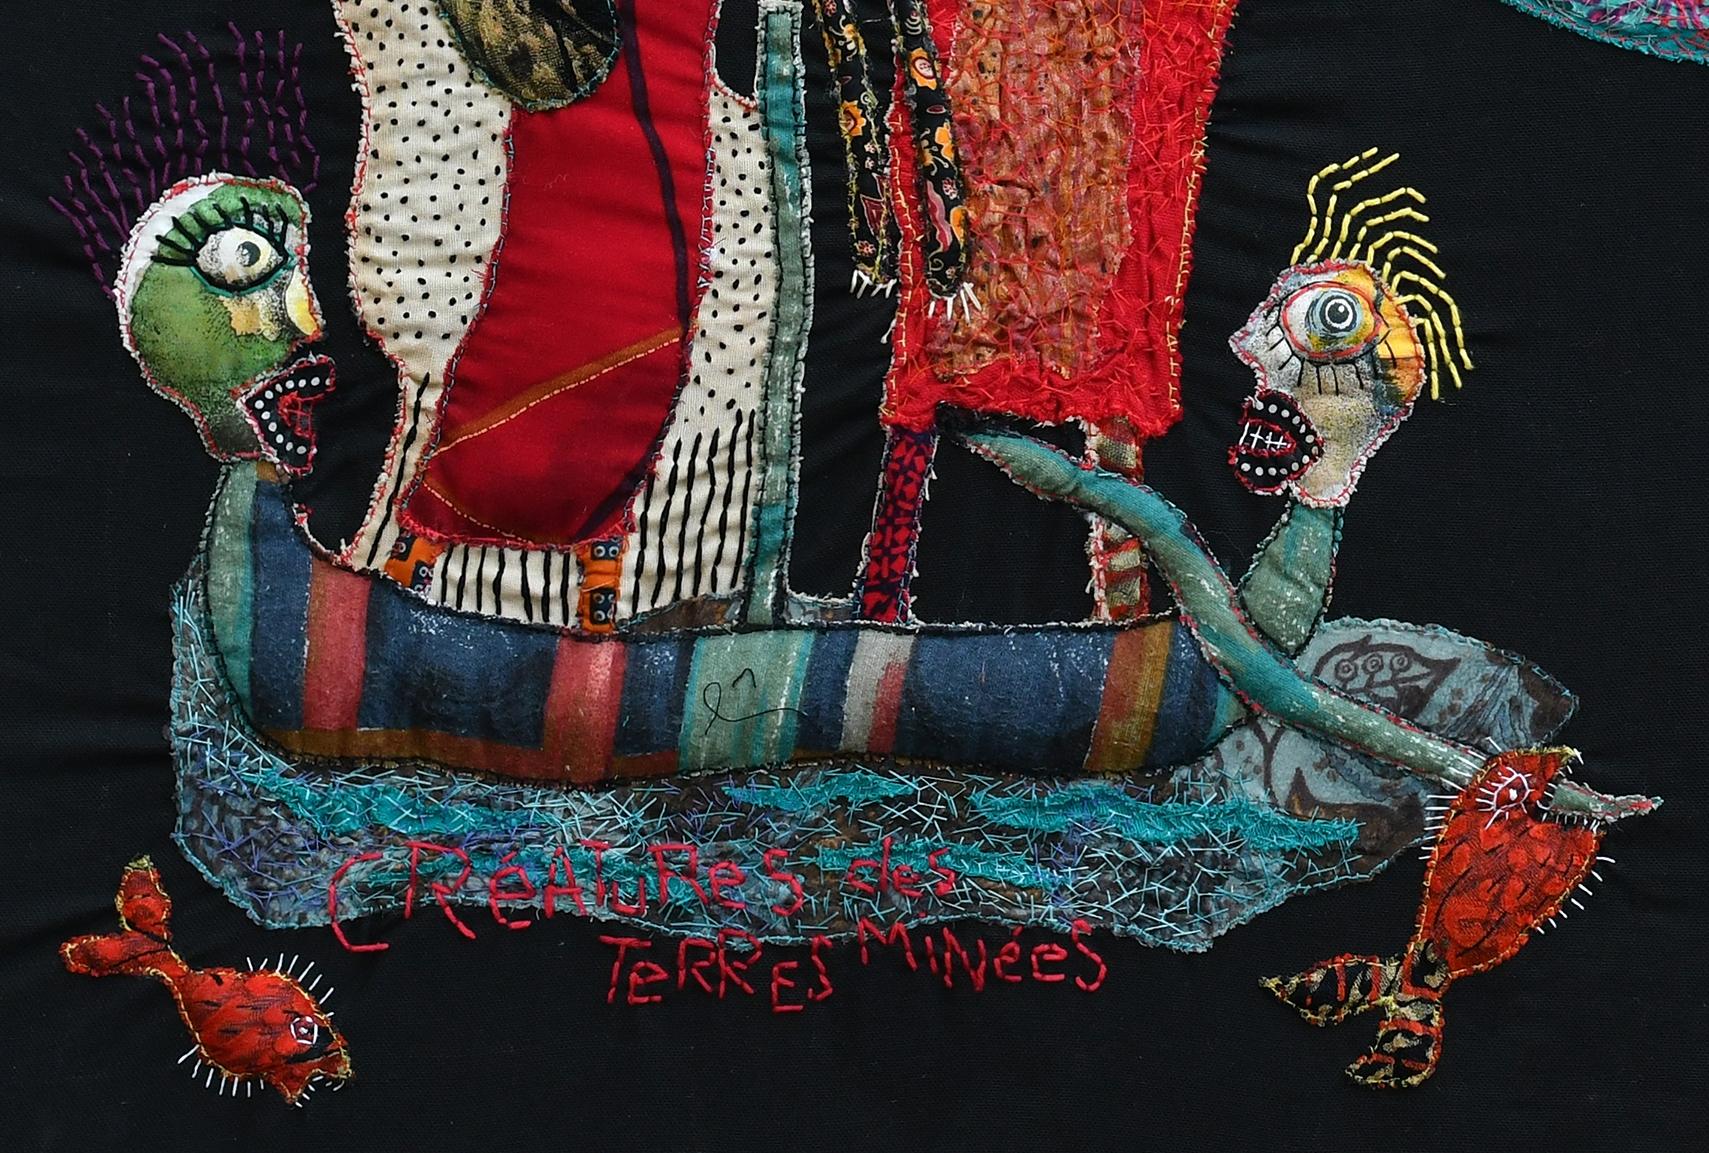 Créatures of the mined lands Barbara d'Antuono 21st Century textile outsider art en vente 7